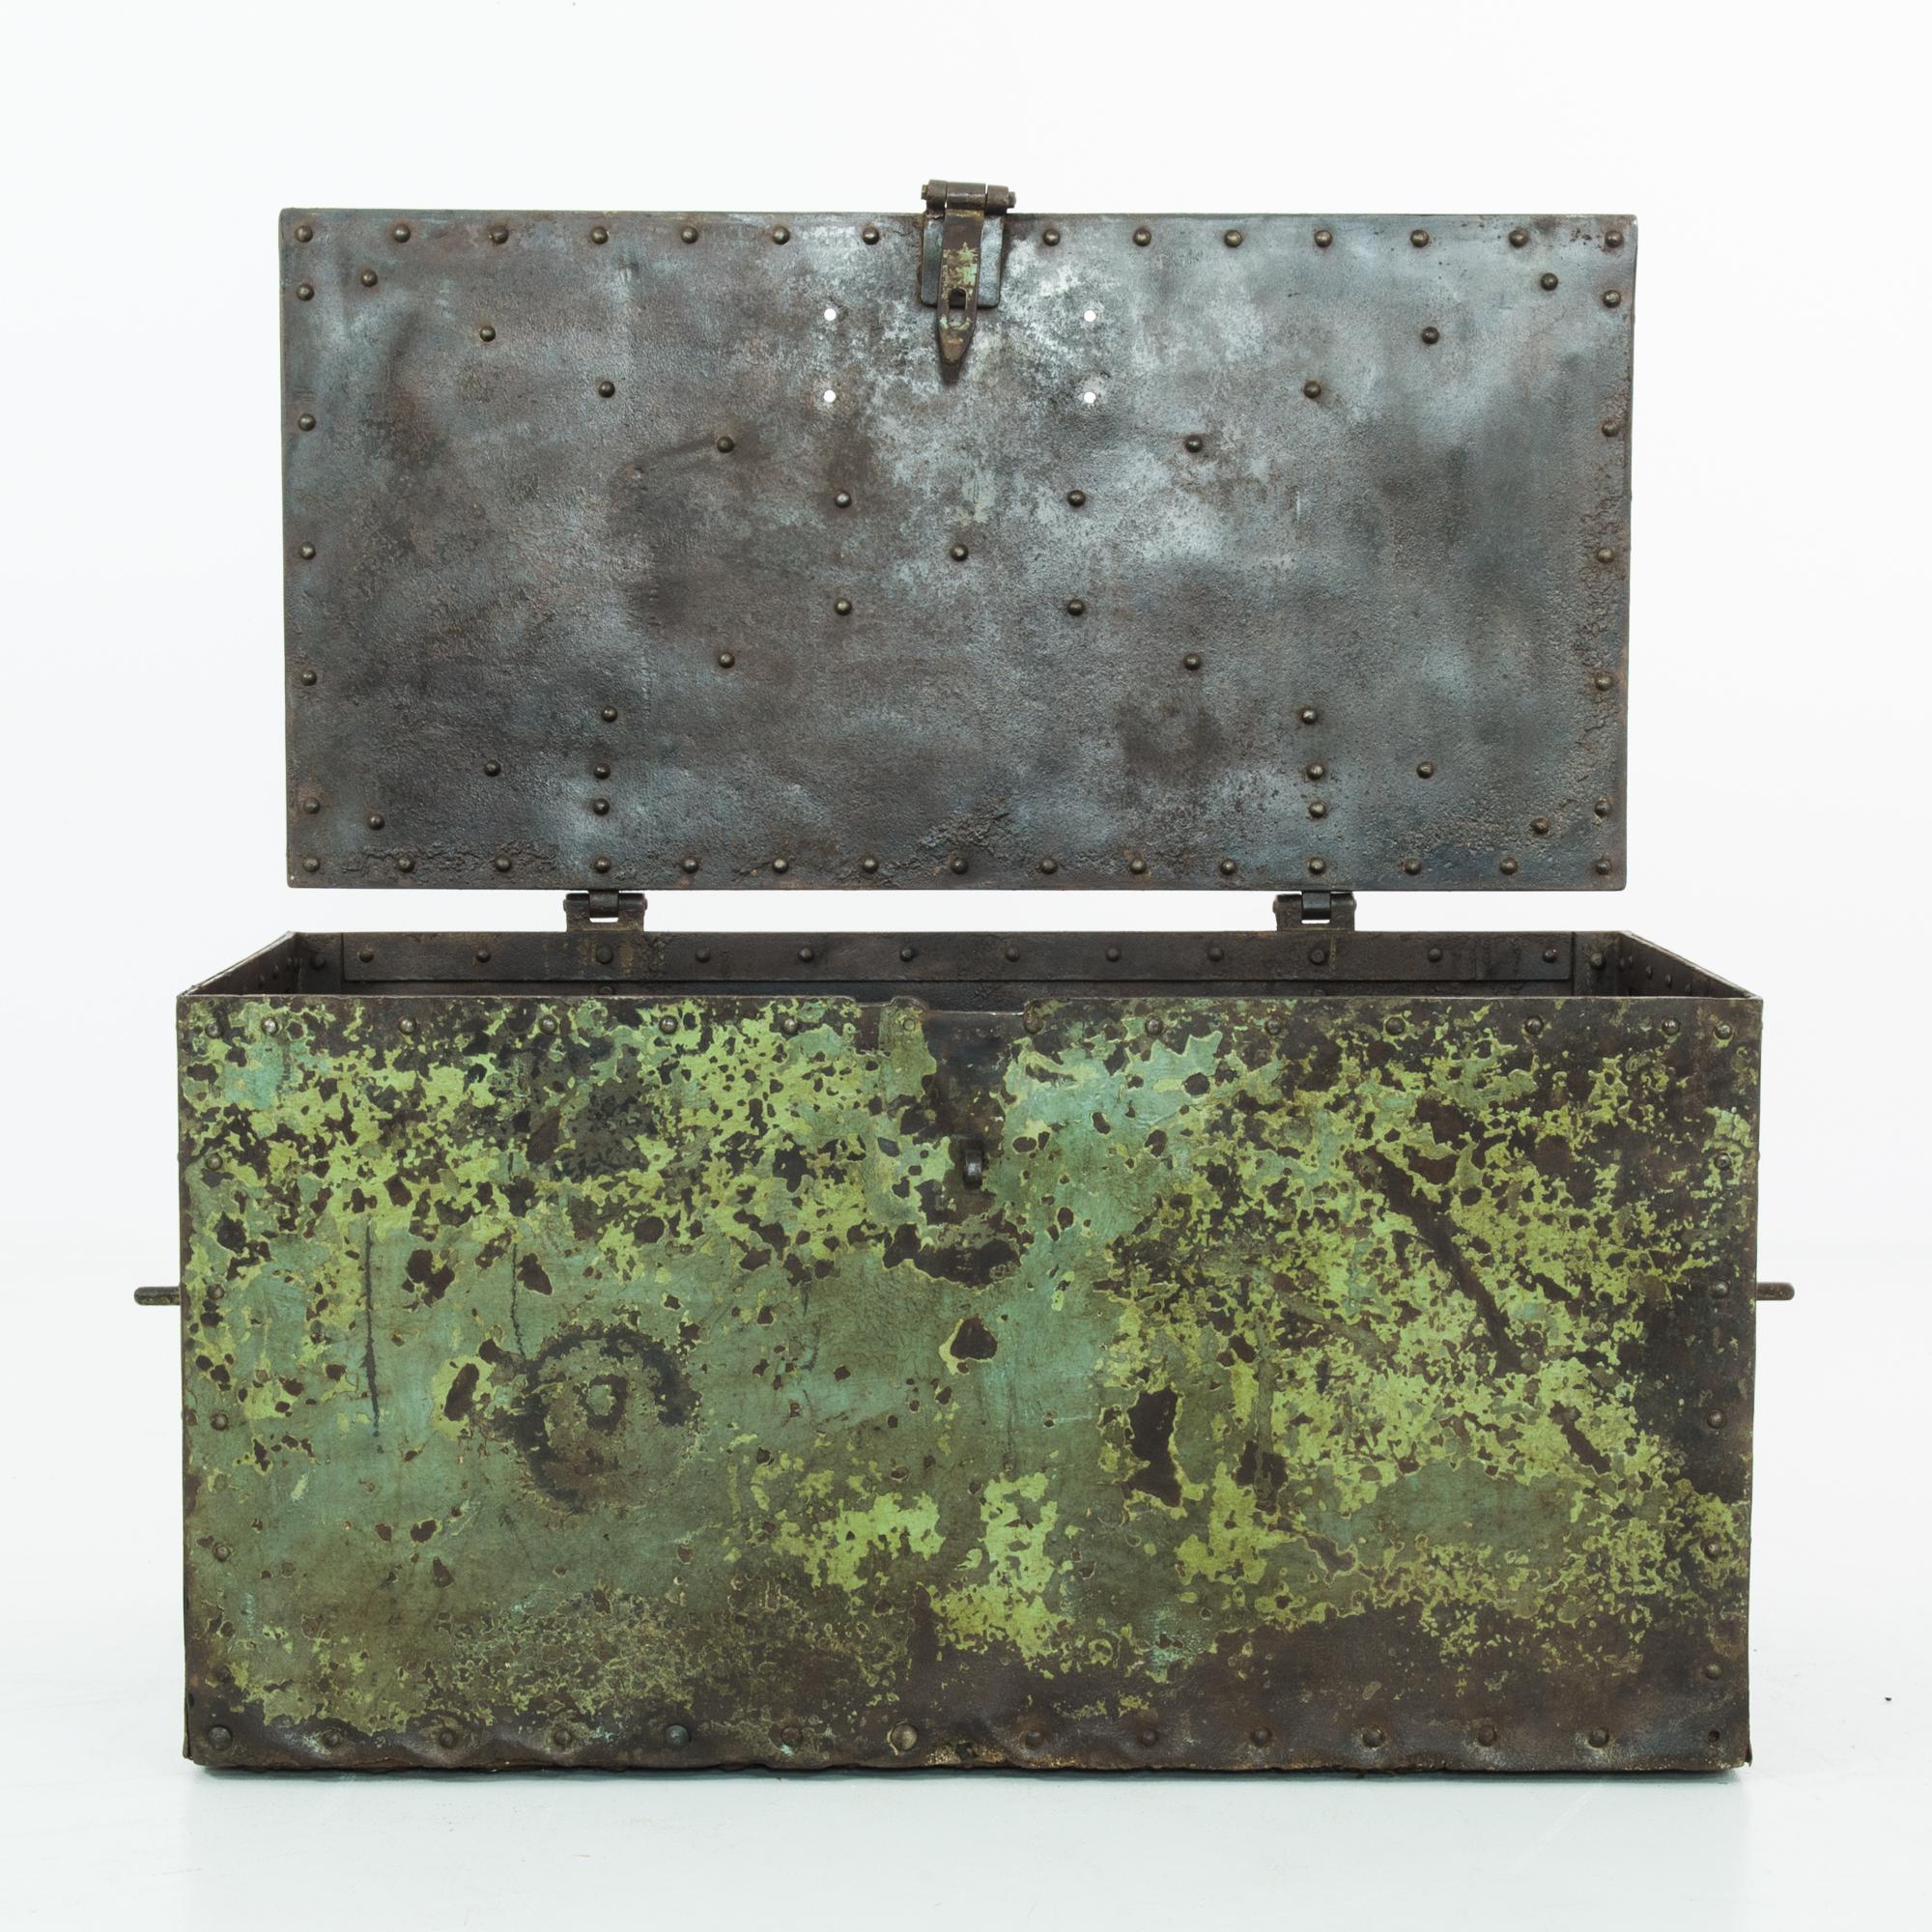 A metal trunk from Czechia, circa 1900, with an evocative patina. The original green paint has weathered to a distinctive timeworn texture, revealing the dark metal beneath. A color palette of lichen greens and slate gray soften the sturdy steel.